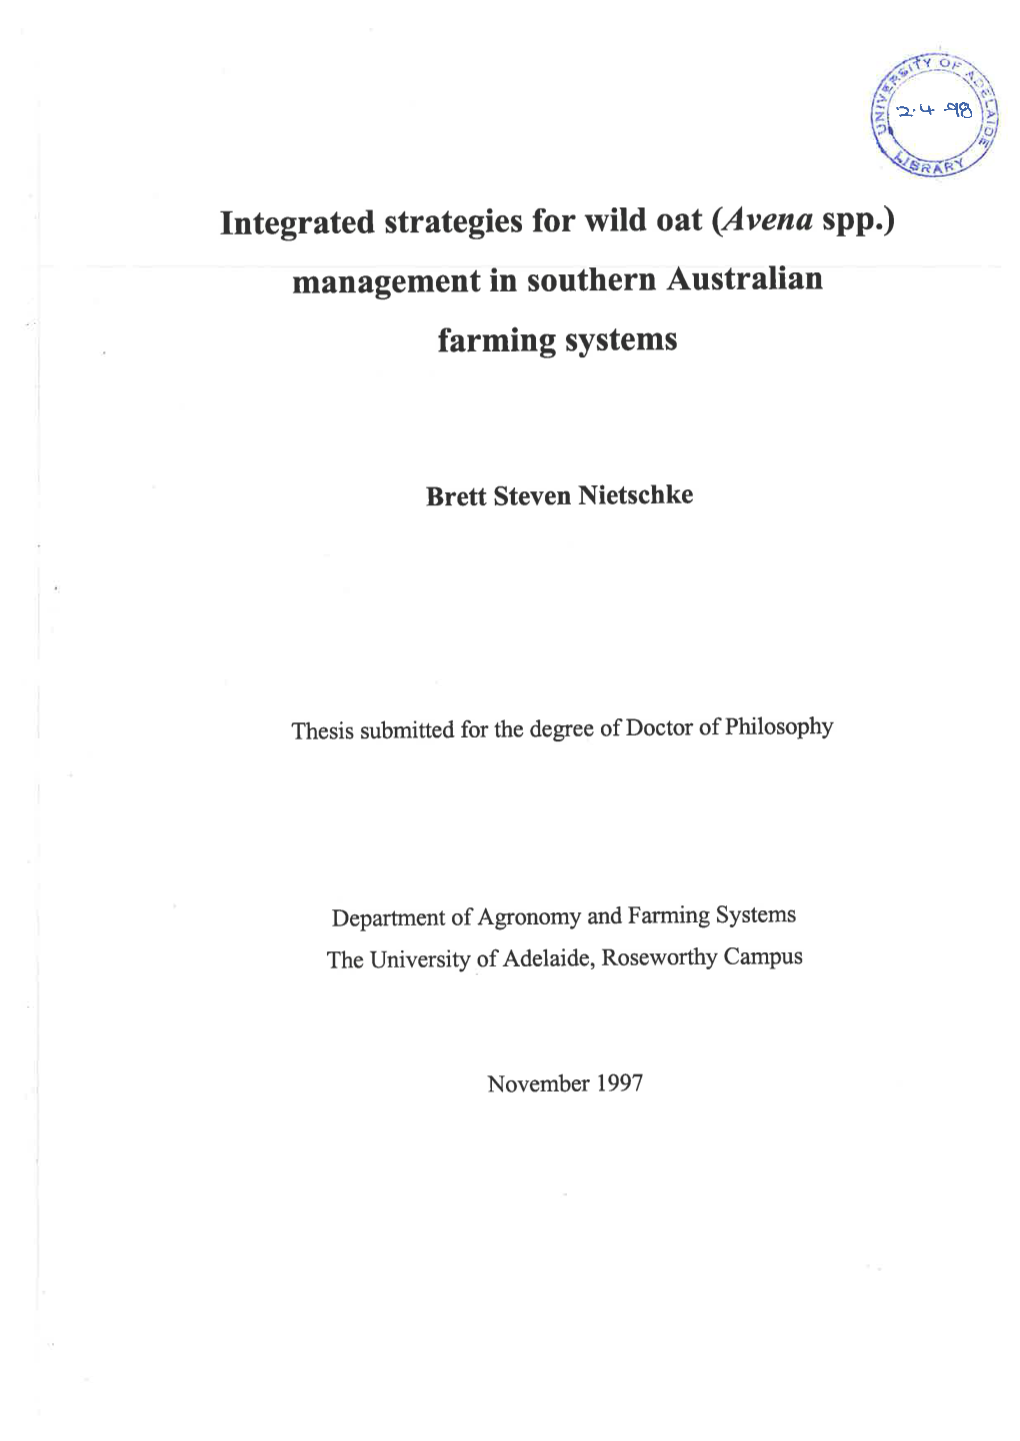 Integrated Strategies for Wild Oat (Avenø Spp.) Management in Southern Australian Farming Systems